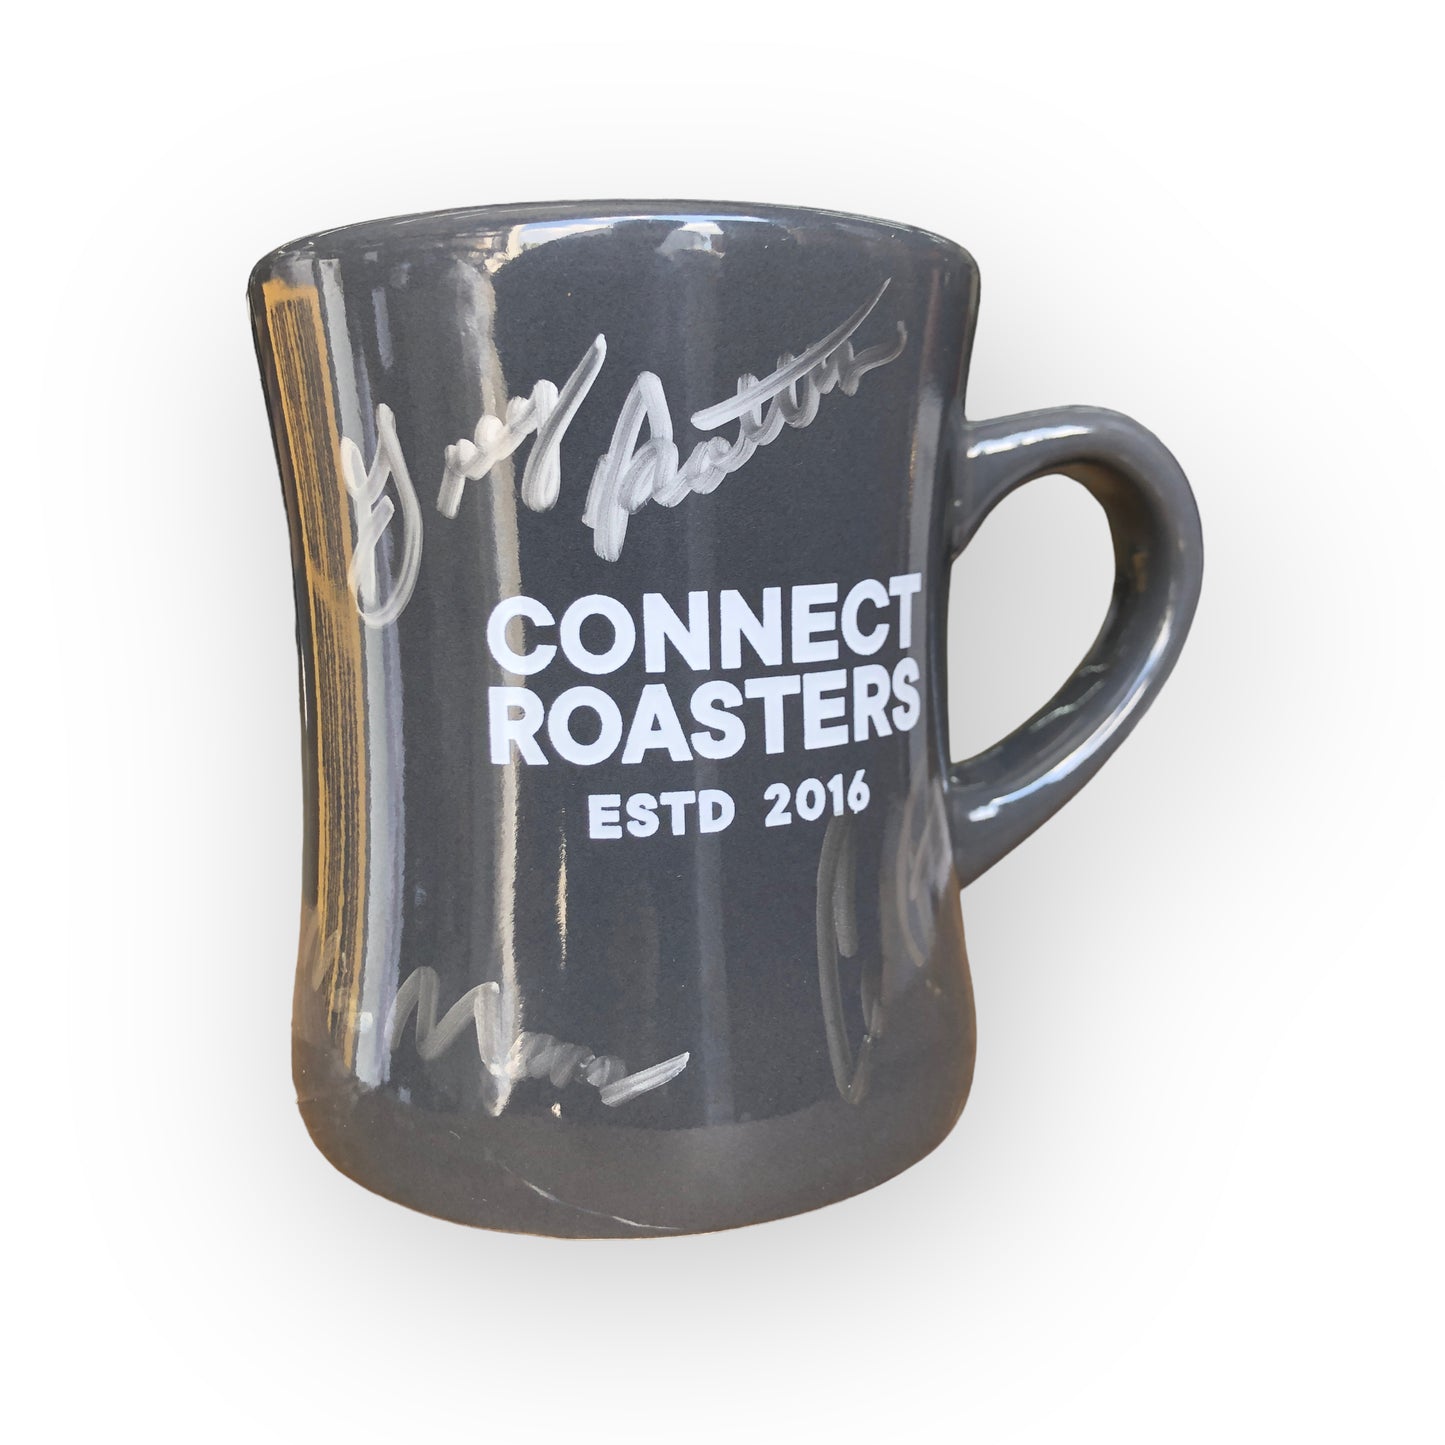 Connect Roasters Retro Diner Mug - Signed by Team Connect